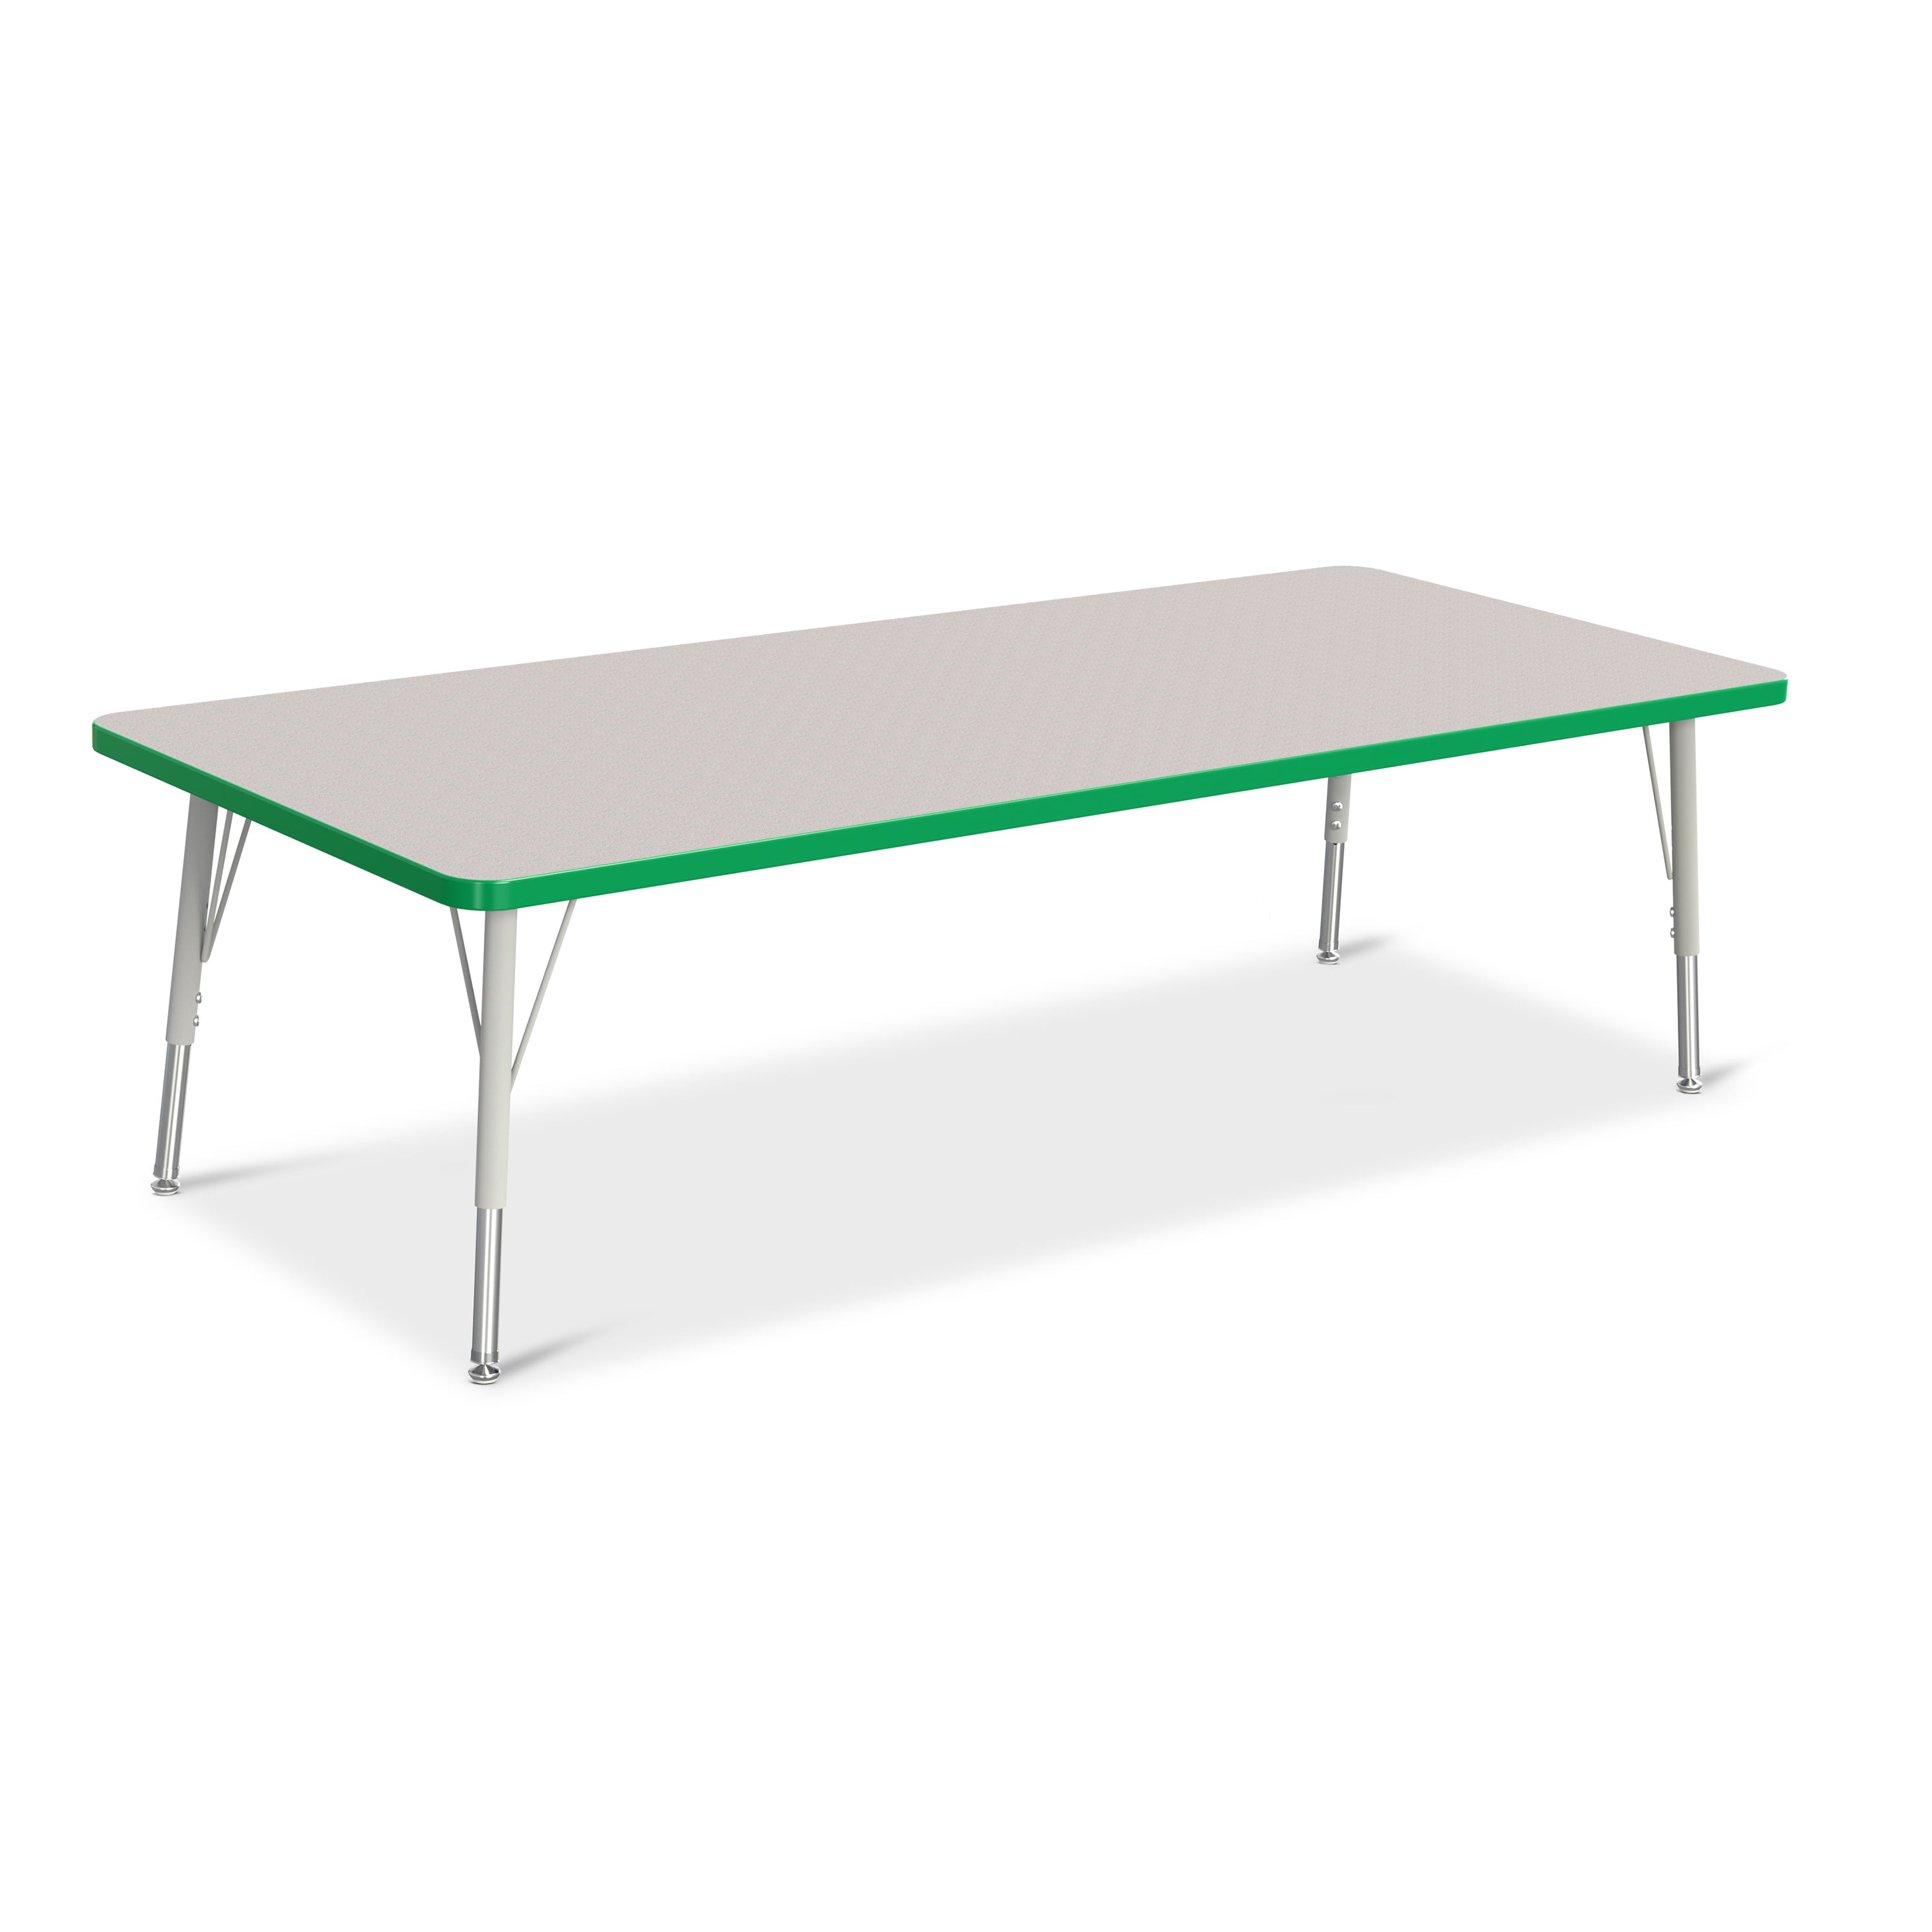 6413JCE119, Berries Rectangle Activity Table - 30" X 72", E-height - Freckled Gray/Green/Gray